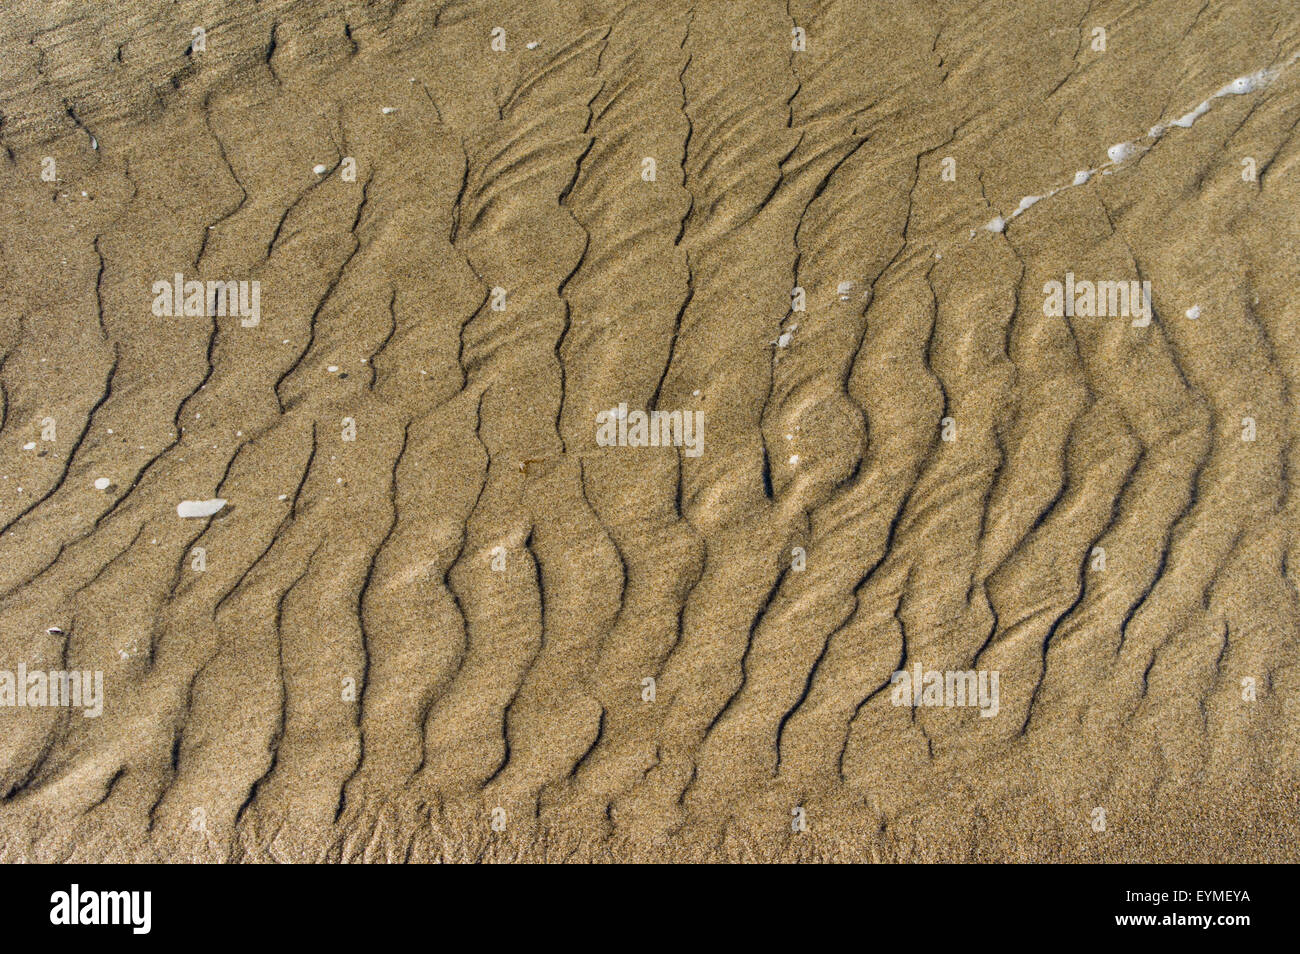 Rippled sand pattern caused by moving water Stock Photo